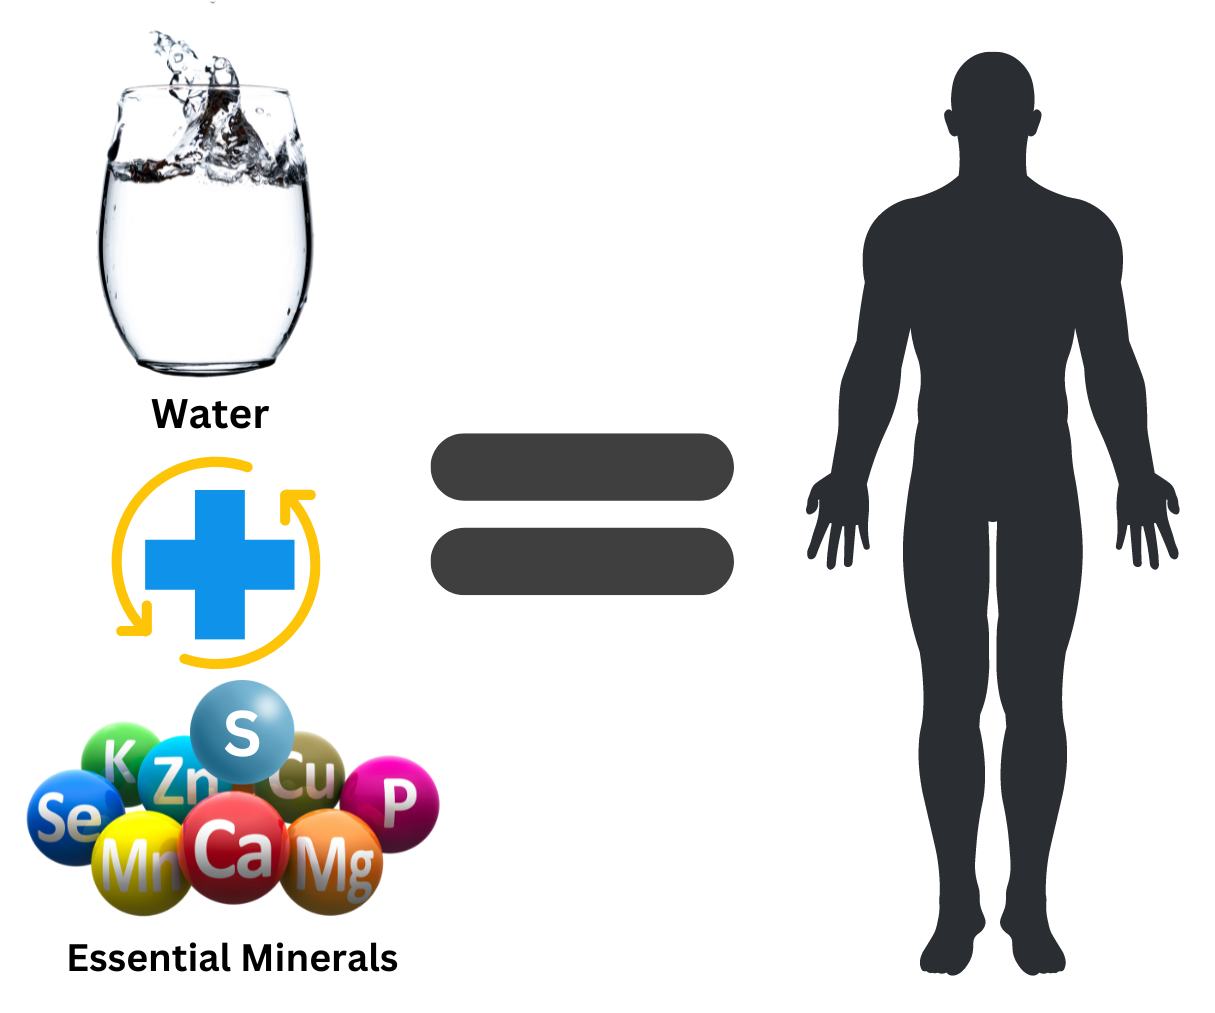 the body is made from water and minerals